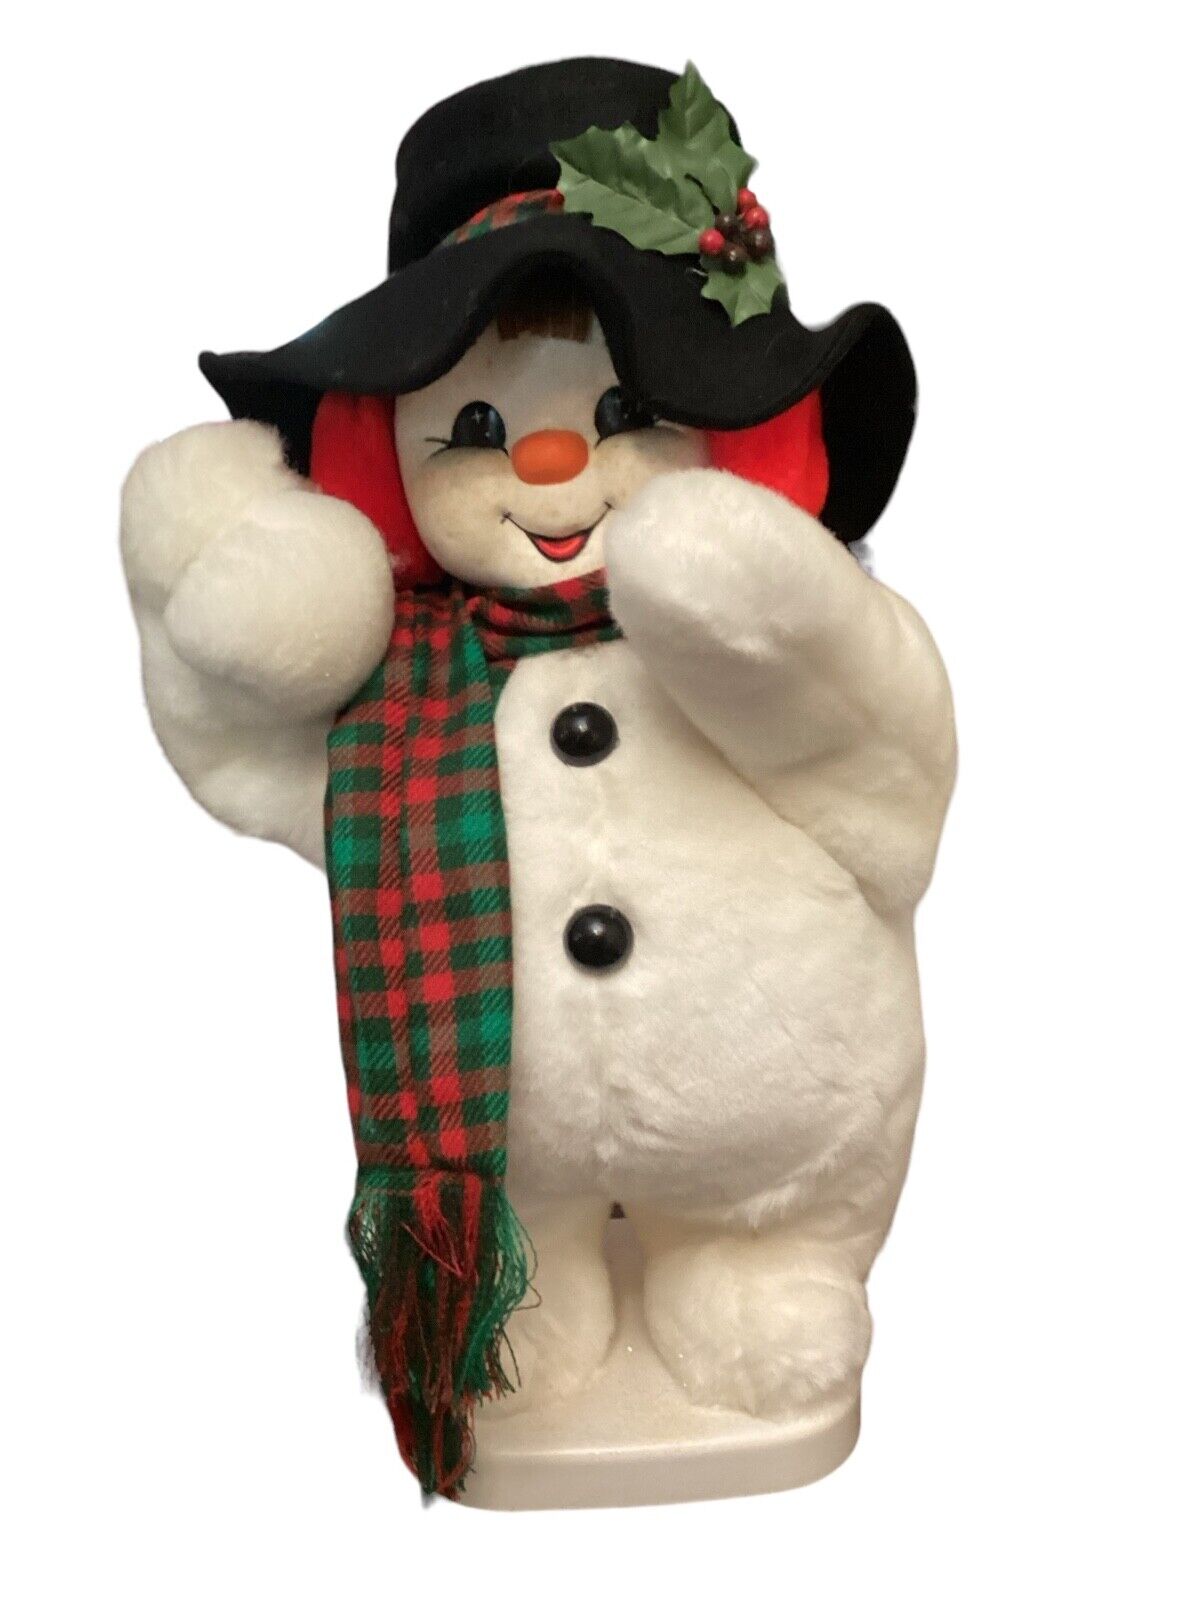 Vintage Santa’s Best animated snowman with earmuffs works well retired